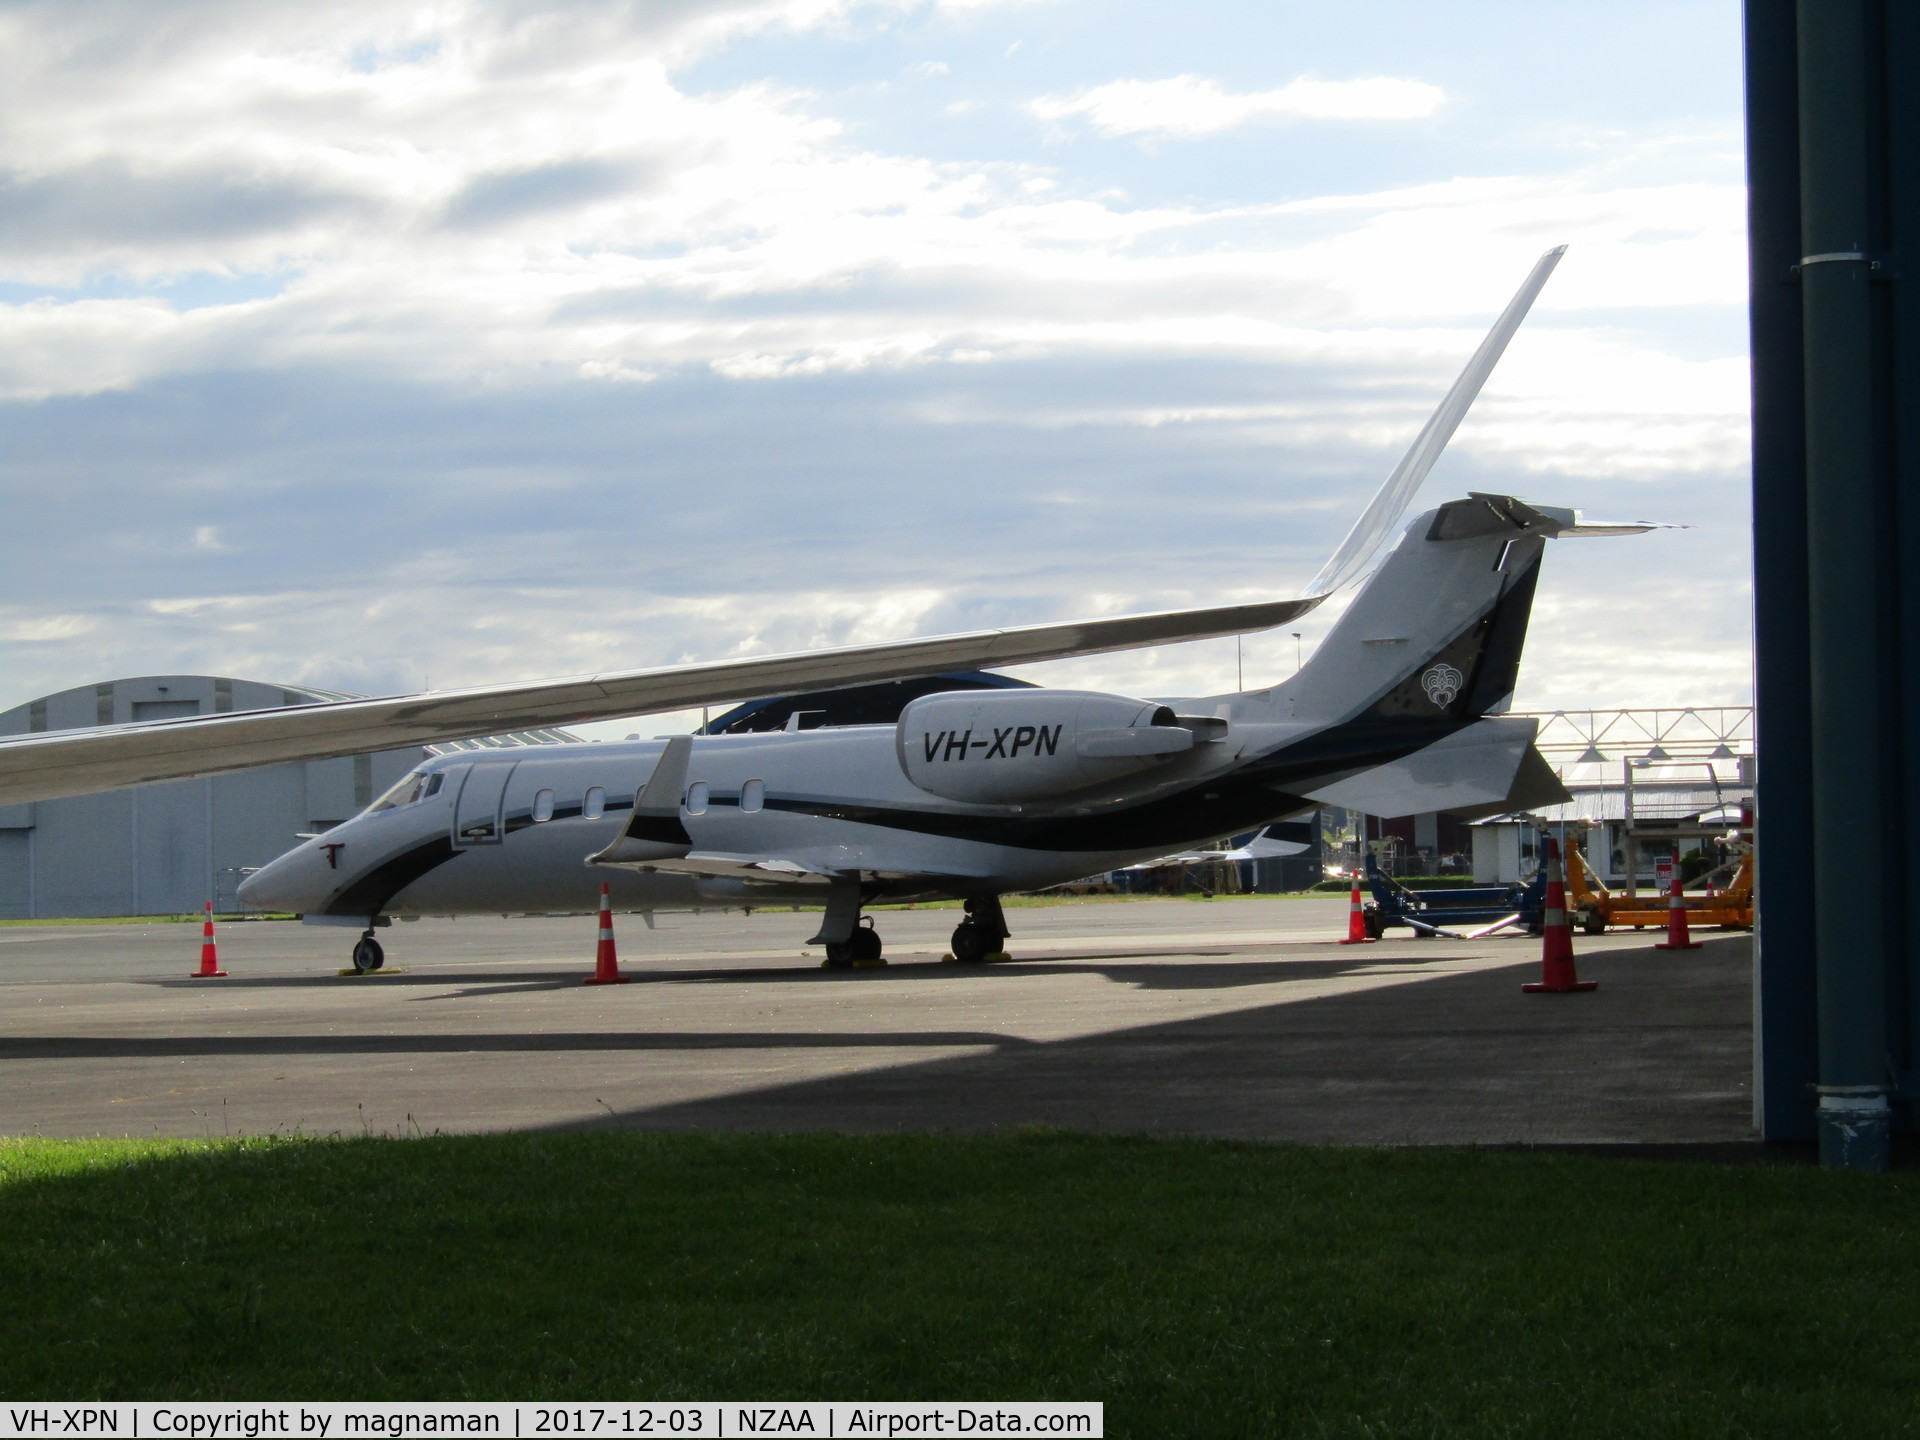 VH-XPN, 2005 Learjet 60 C/N 60-290, been here before but my first piccy